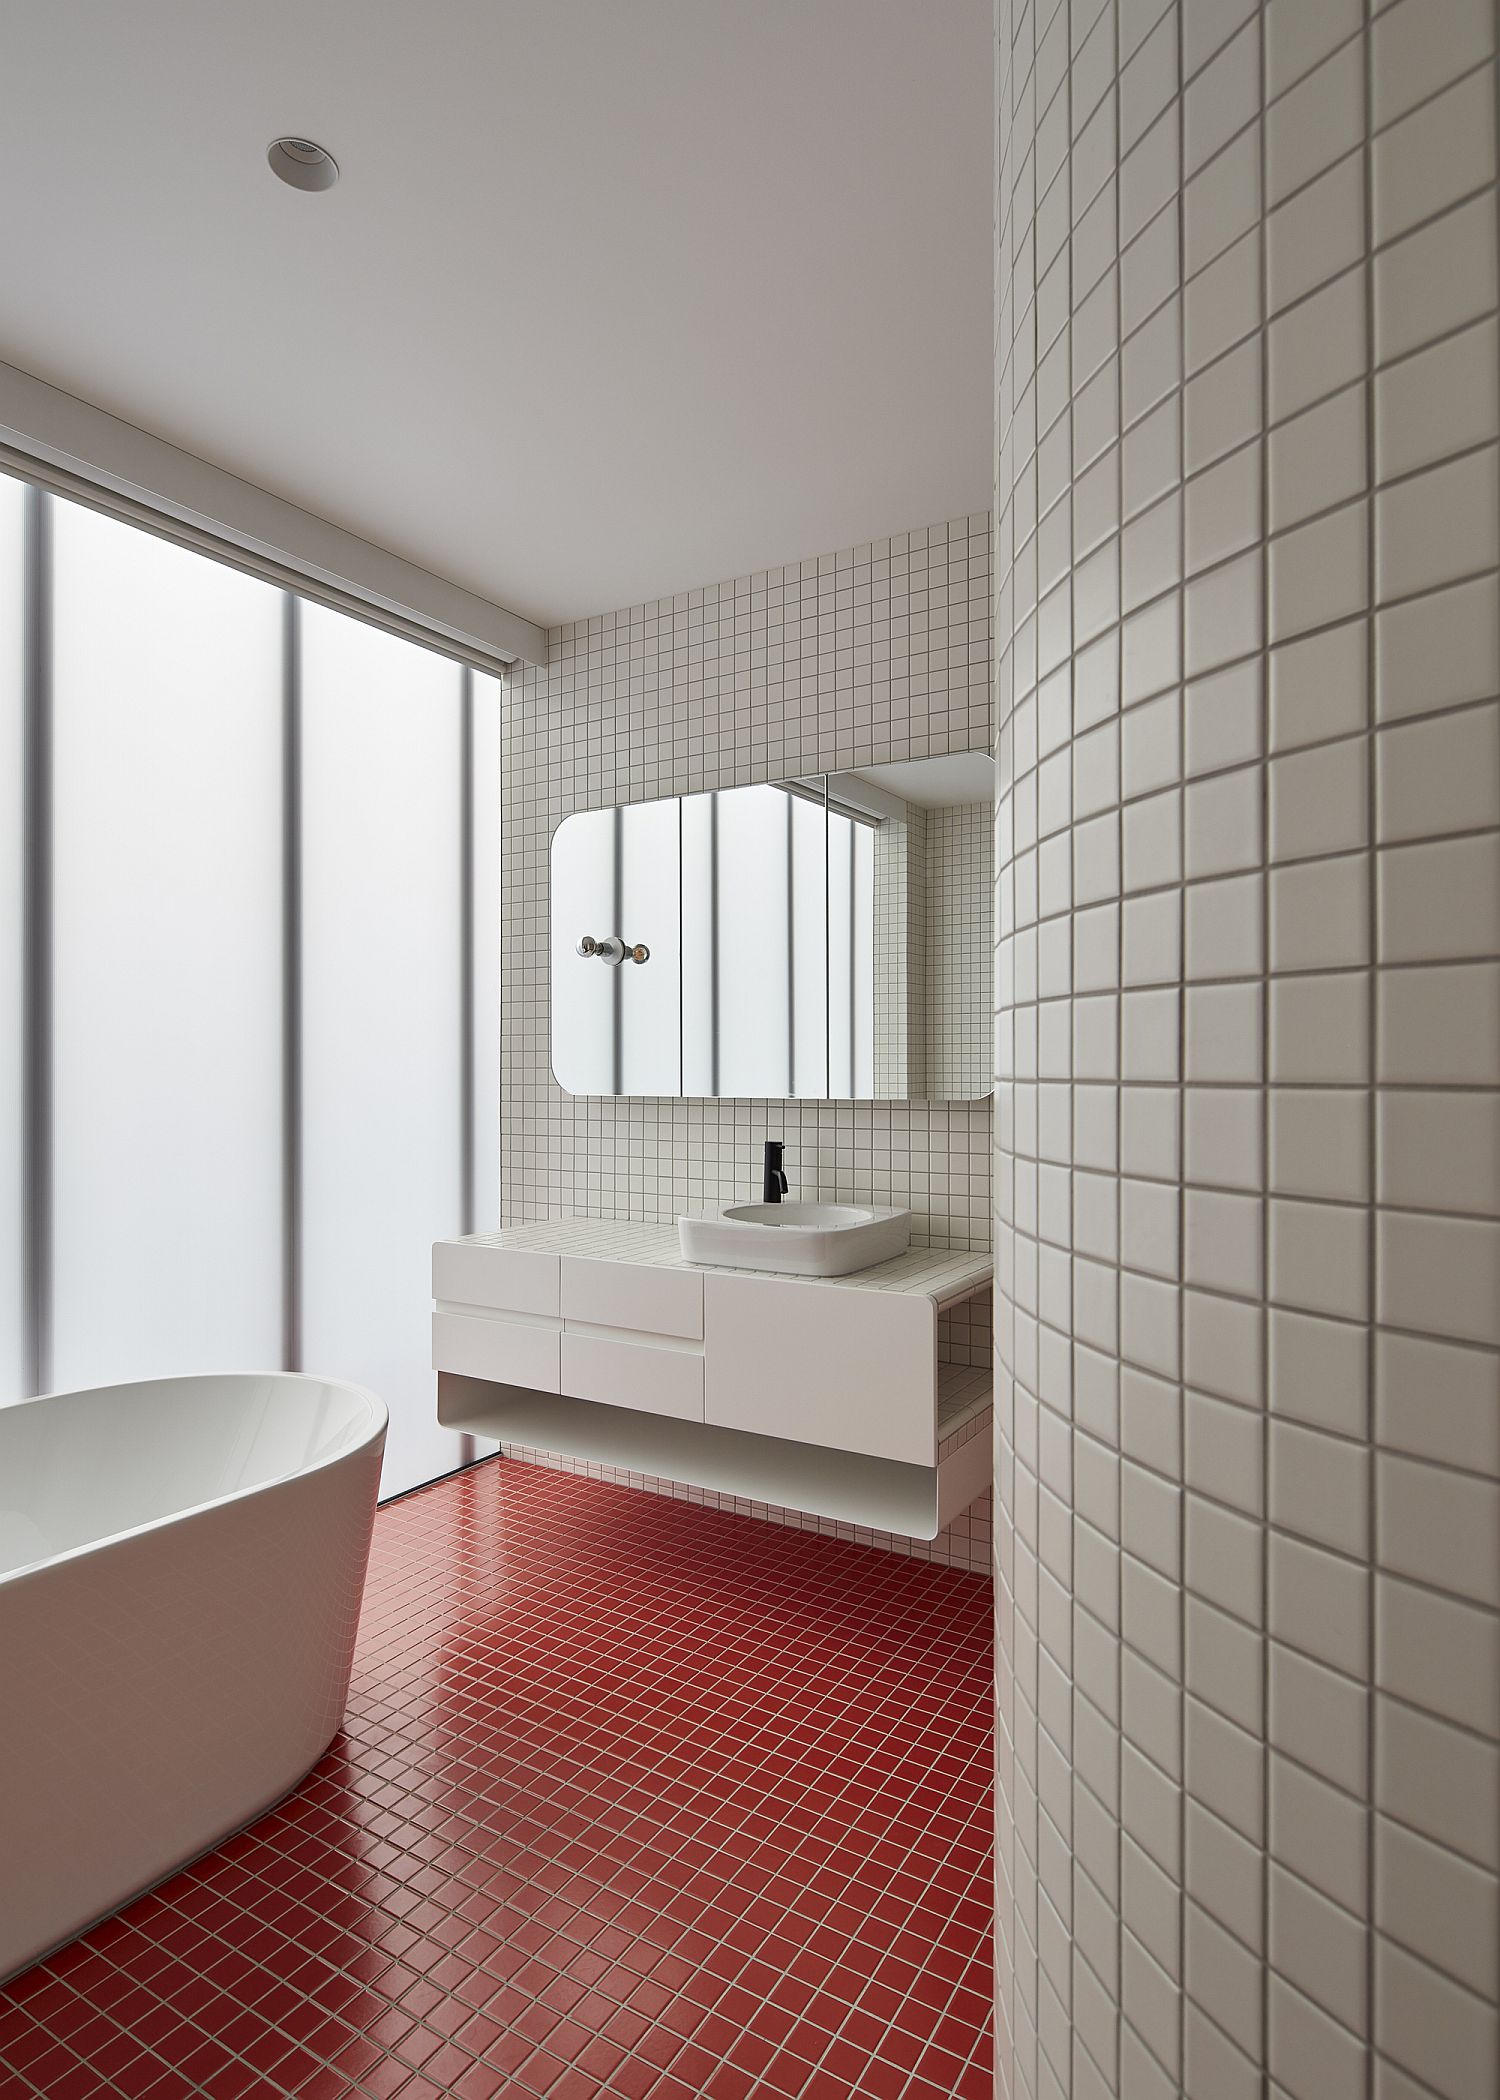 Bright red tiles for the floor in the moern white bathroom